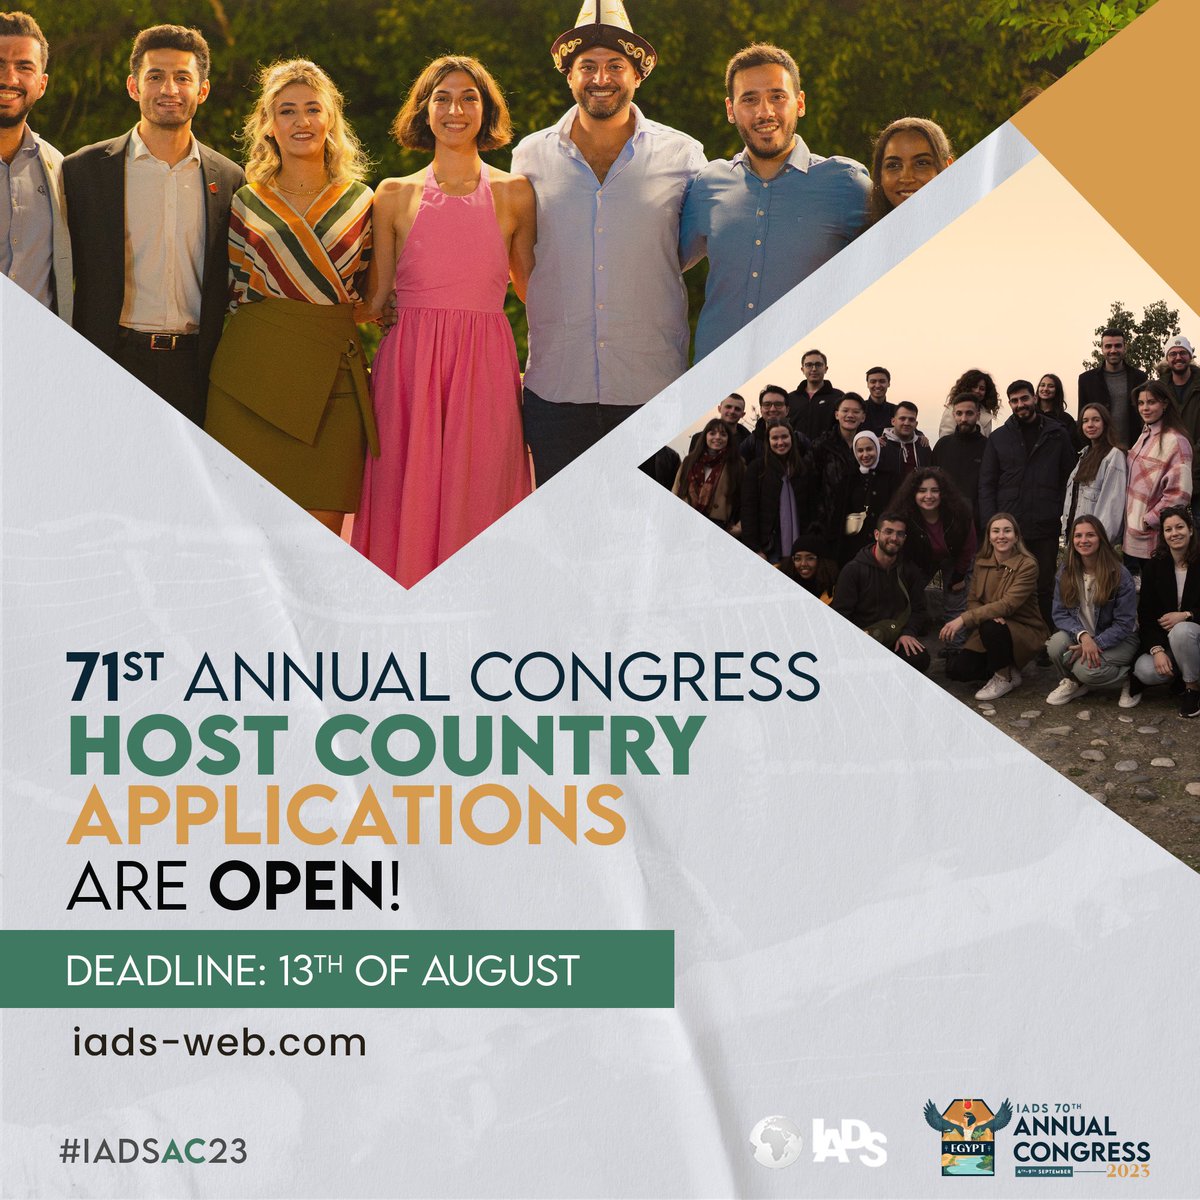 Apply to be the host of the Annual Congress in 2024! Iads-web.com/meetings Show us your hospitality, gain unique experience, expand your outlook! #iadsweborg #dentistry #dentalstudents #dentist #congress #annualcongress